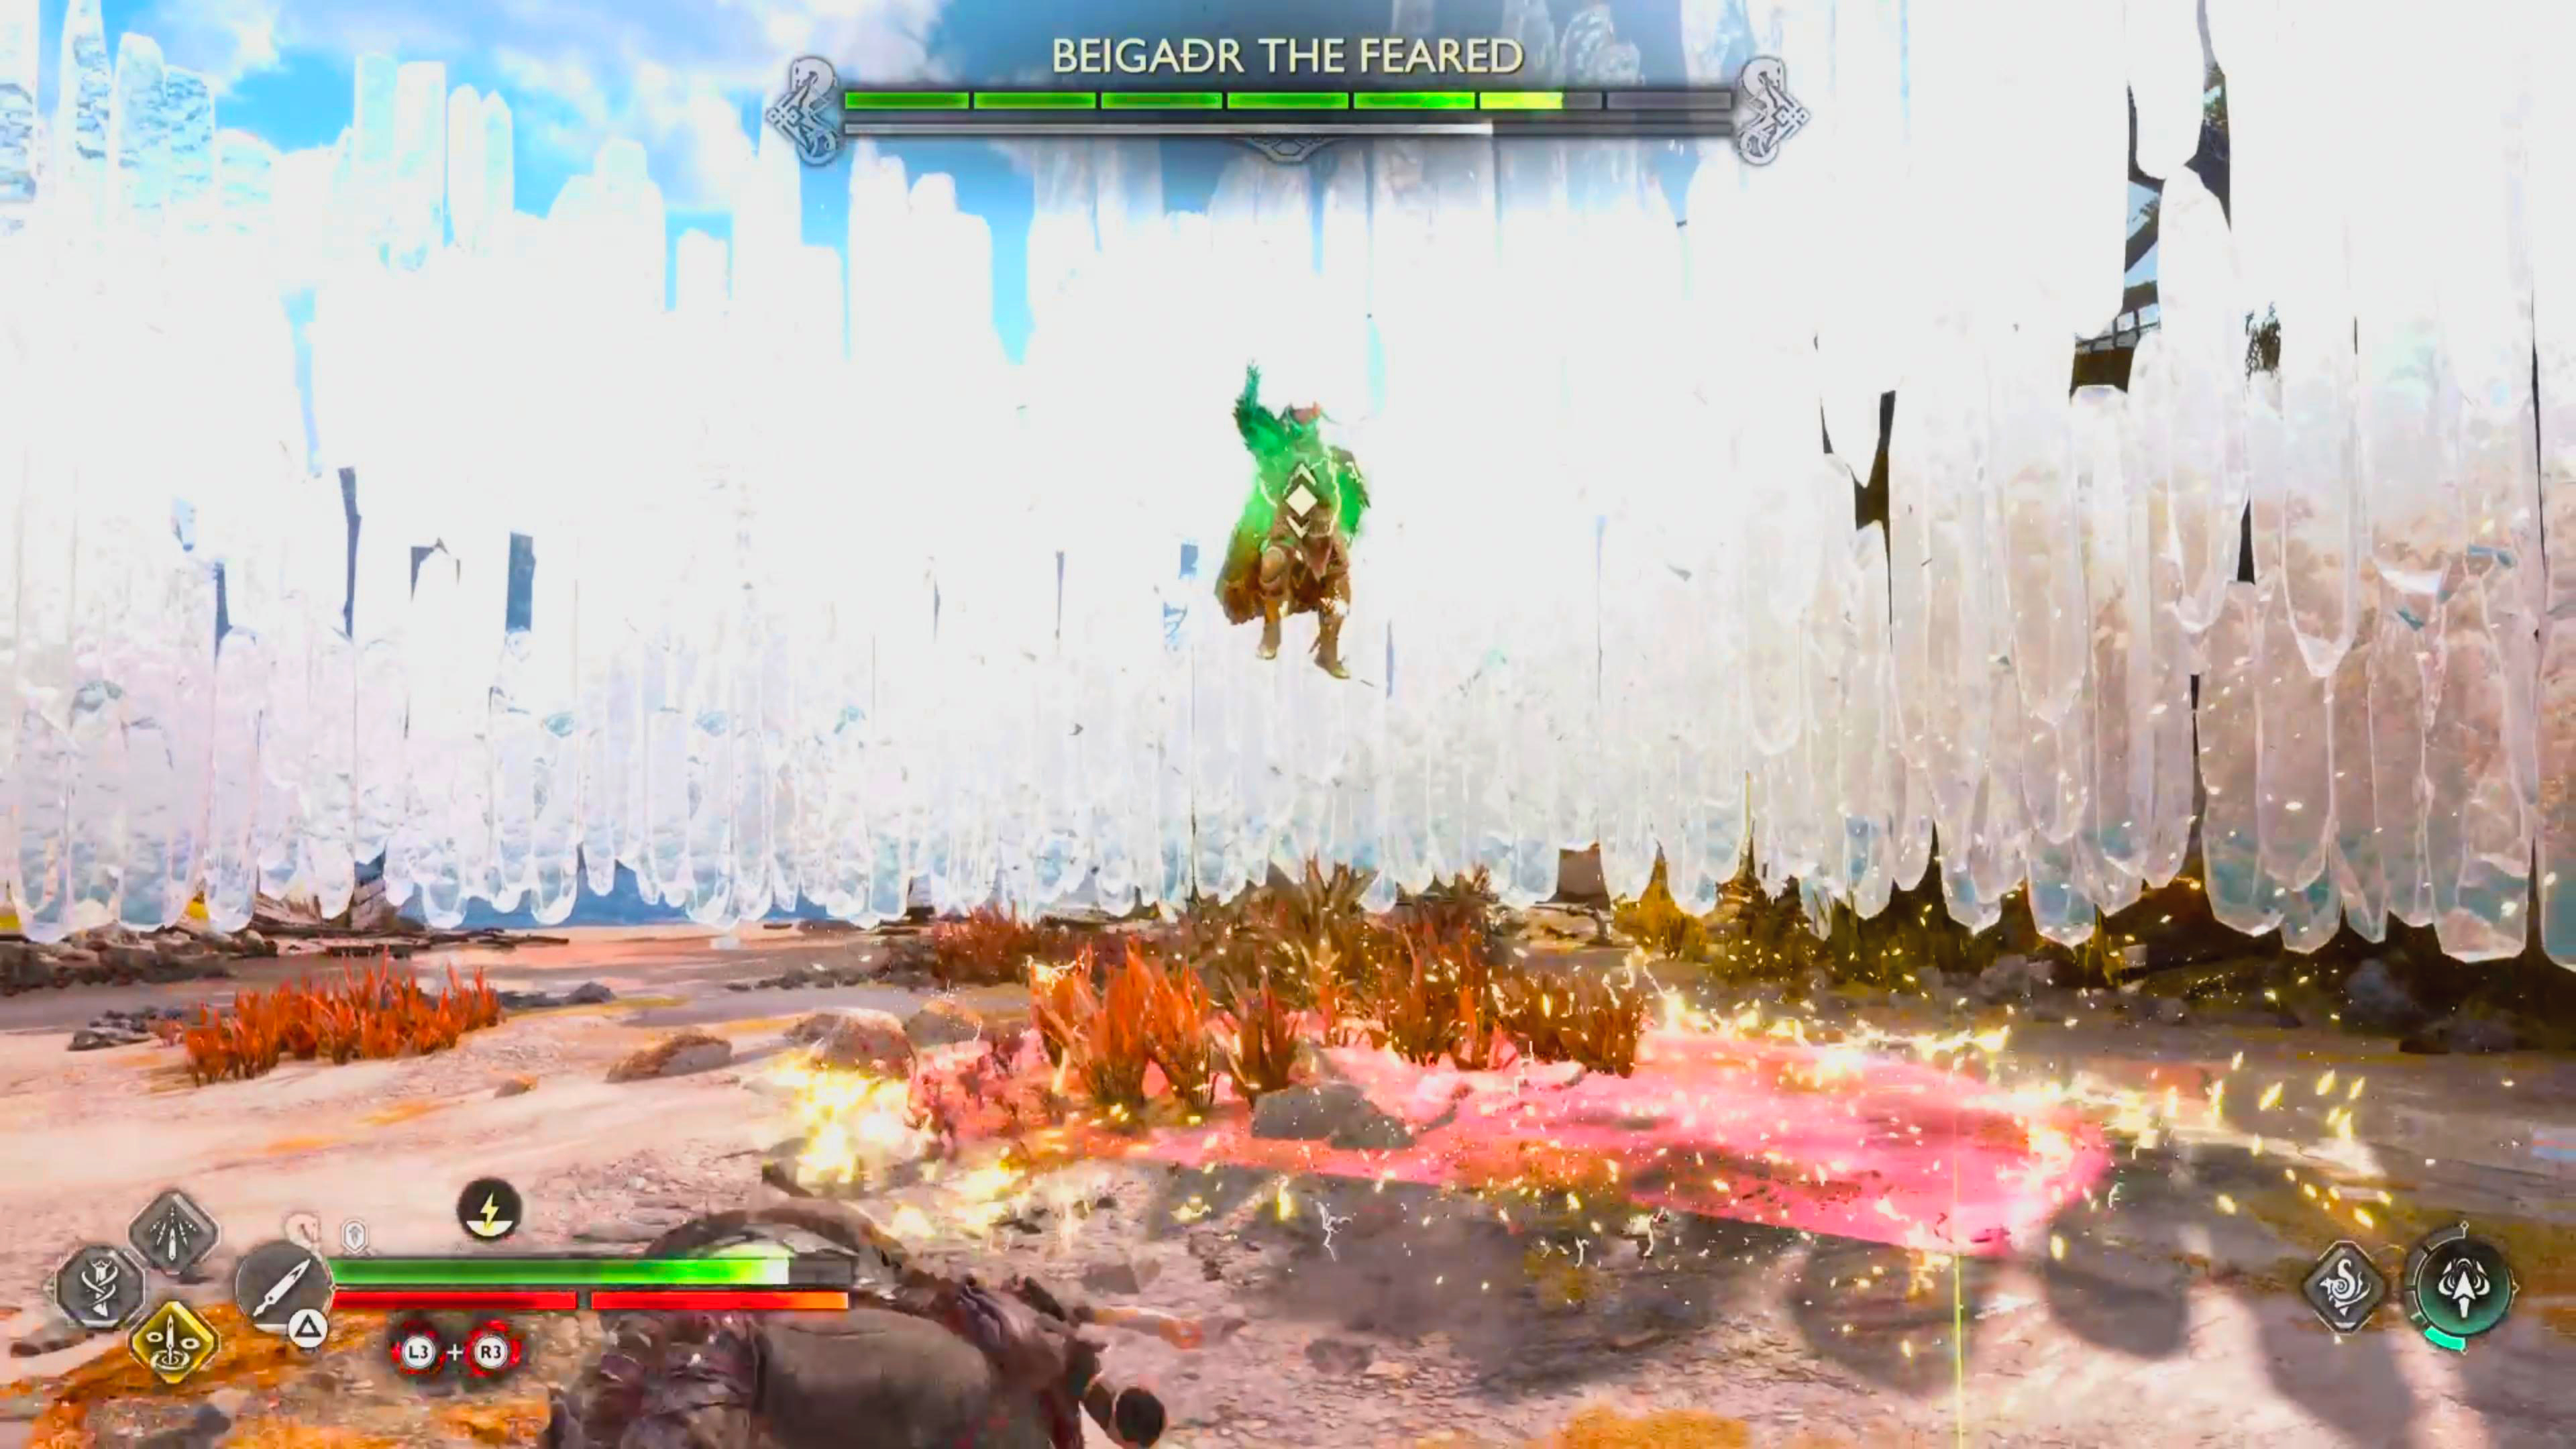 Beigadr will jump into the air, raising one had while a red-ring appears around him. This will place red circles that follow you around, placing a thunderbolt in their location.